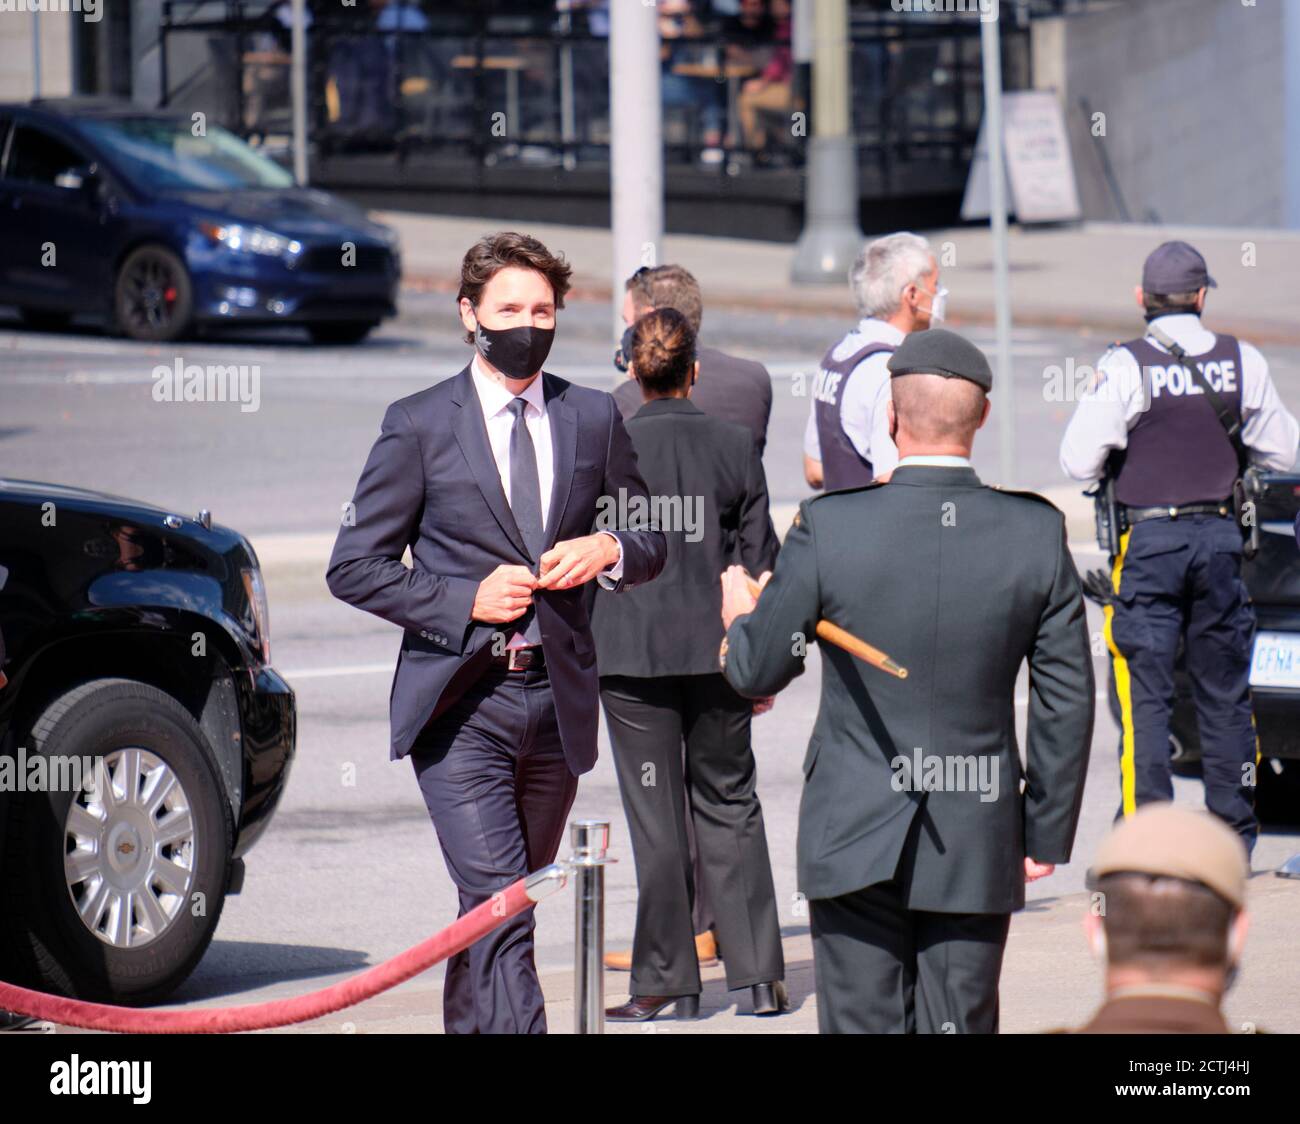 Ottawa, Canada. September 23rd, 2020. Canadian Prime Minister, Justin Trudeau arrives at the Canadian Senate for the Speech of the Throne. The current parliament was prorogued a month ago as a reset after a difficult year for the Liberal minority government, from the on-going Pandemic to scandals, and the new Throne Speech is used as a reset to present to Canadians how the government plans to rebuild from the impact of the pandemic. Credit: meanderingemu/Alamy Live News Stock Photo